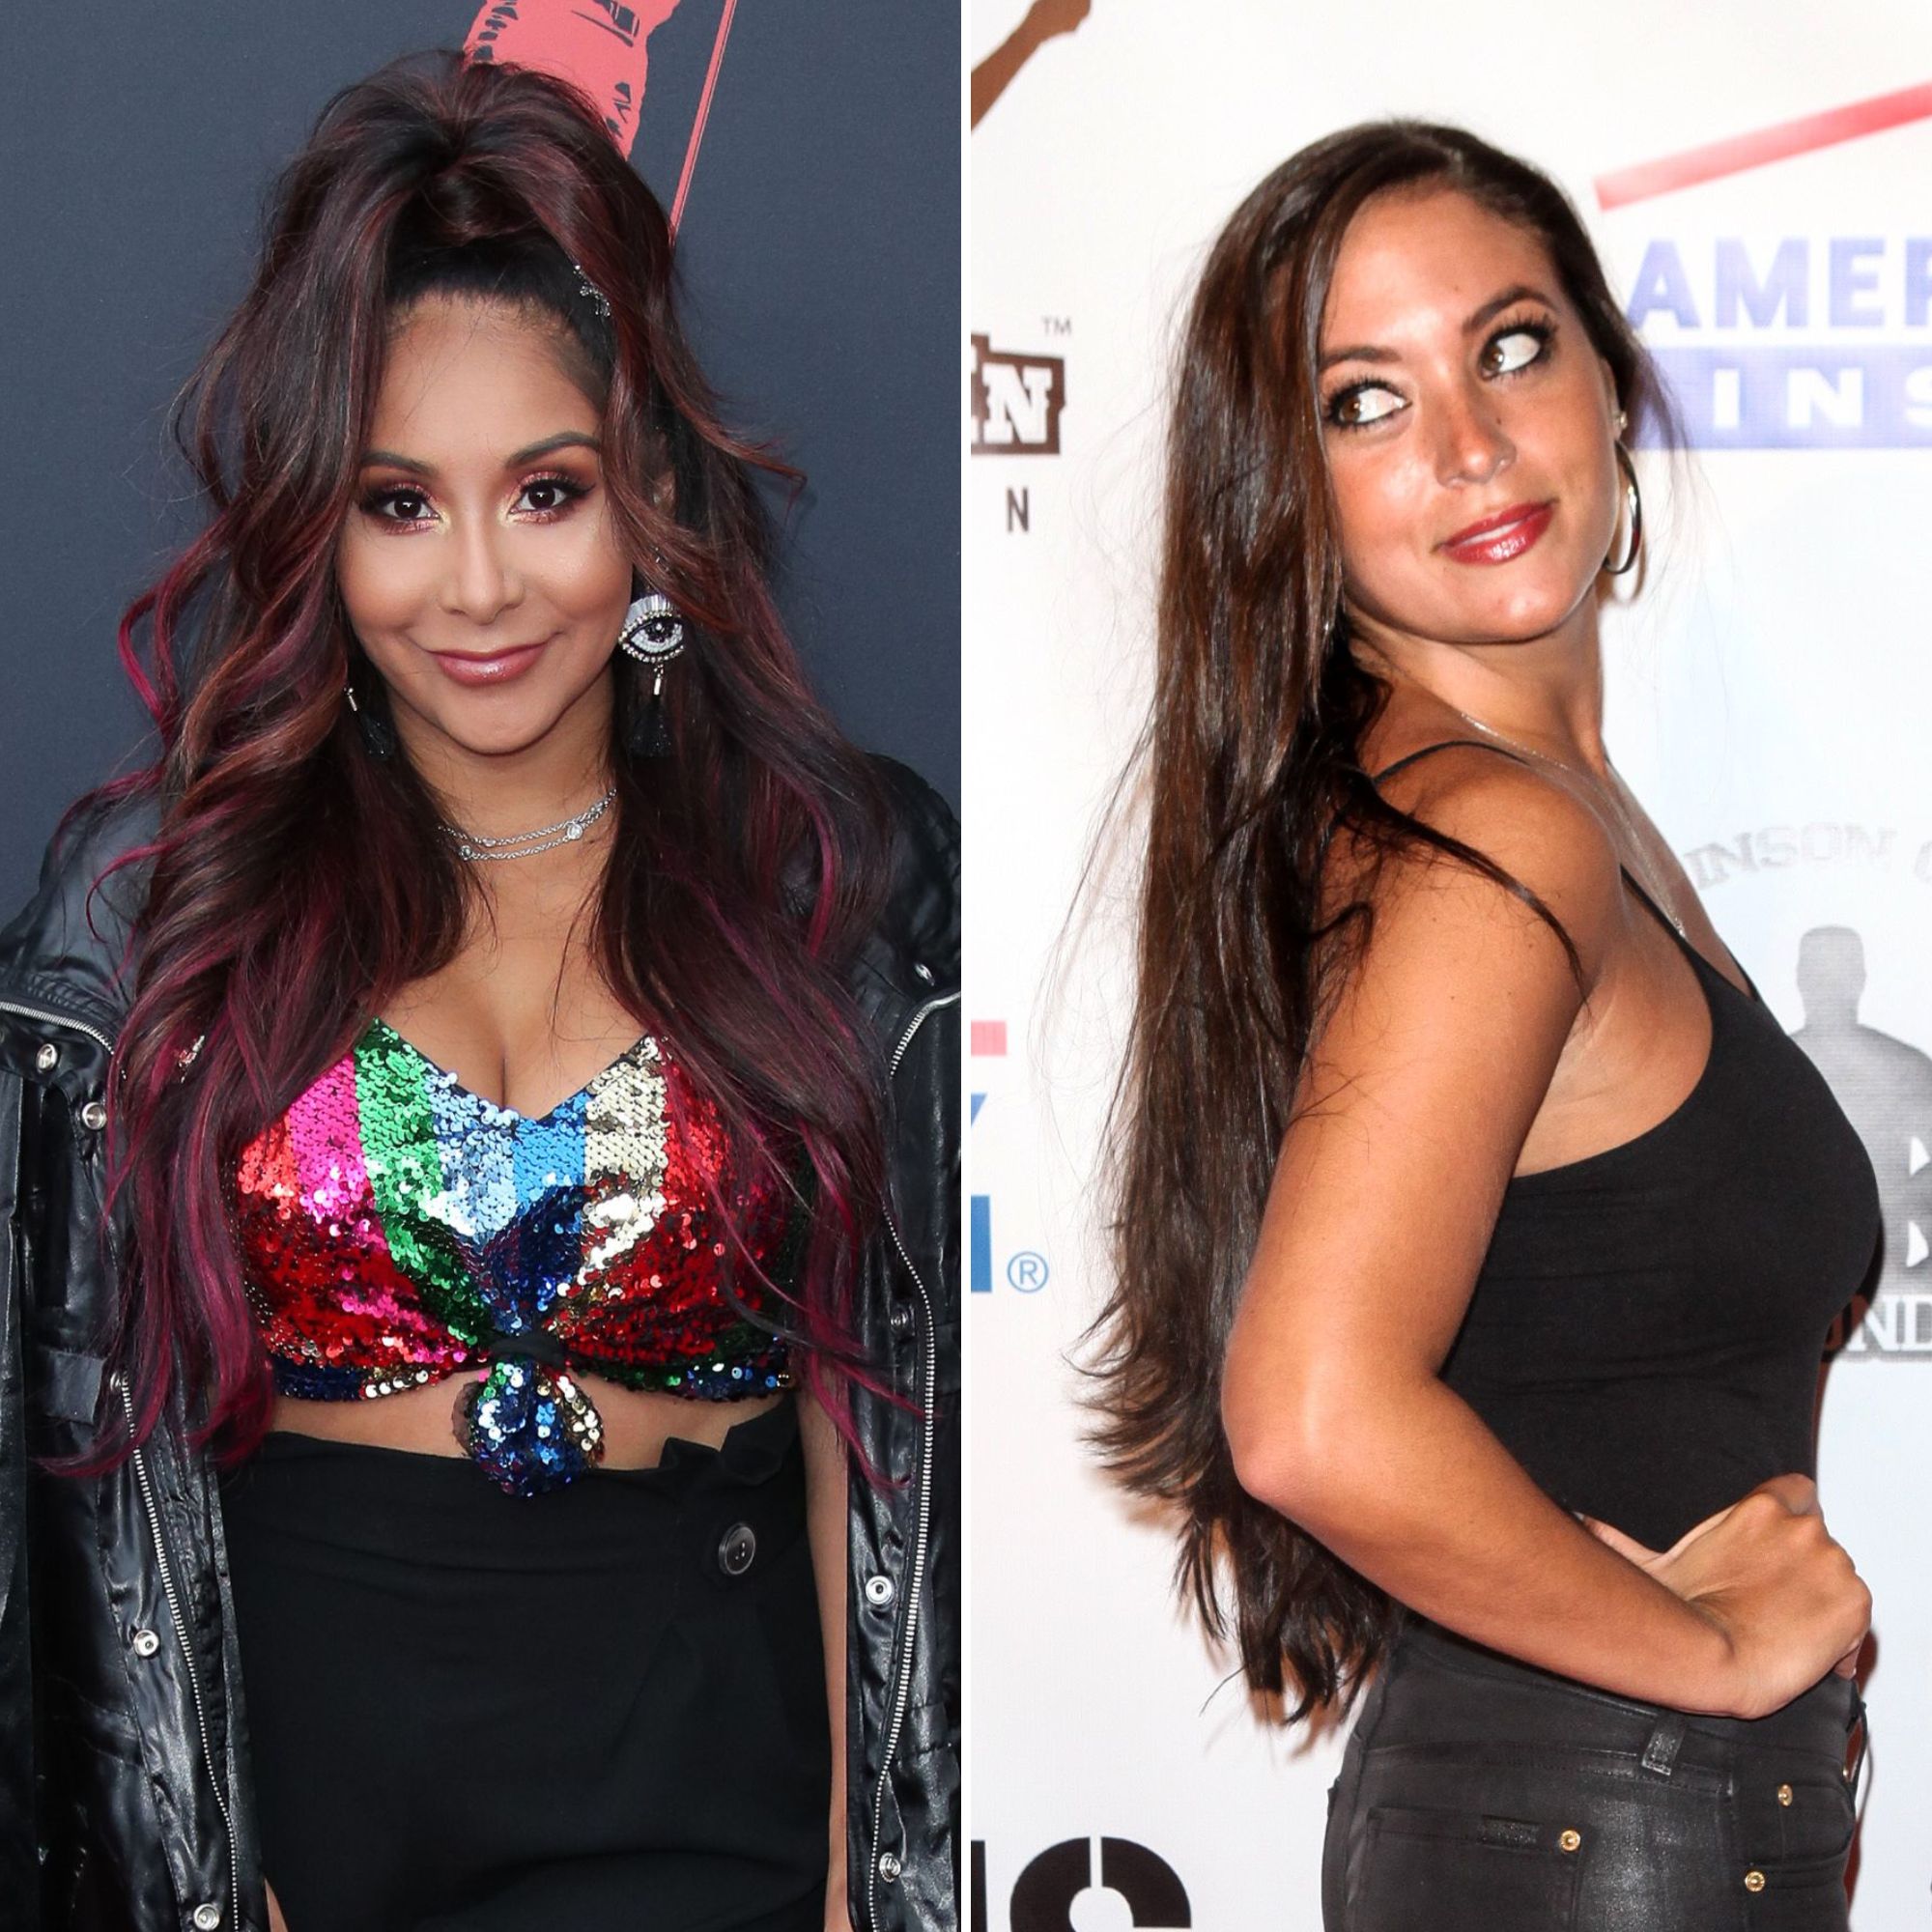 Jersey Shore's Nicole Polizzi on Why Sammi Giancola Won't Be on Reboot